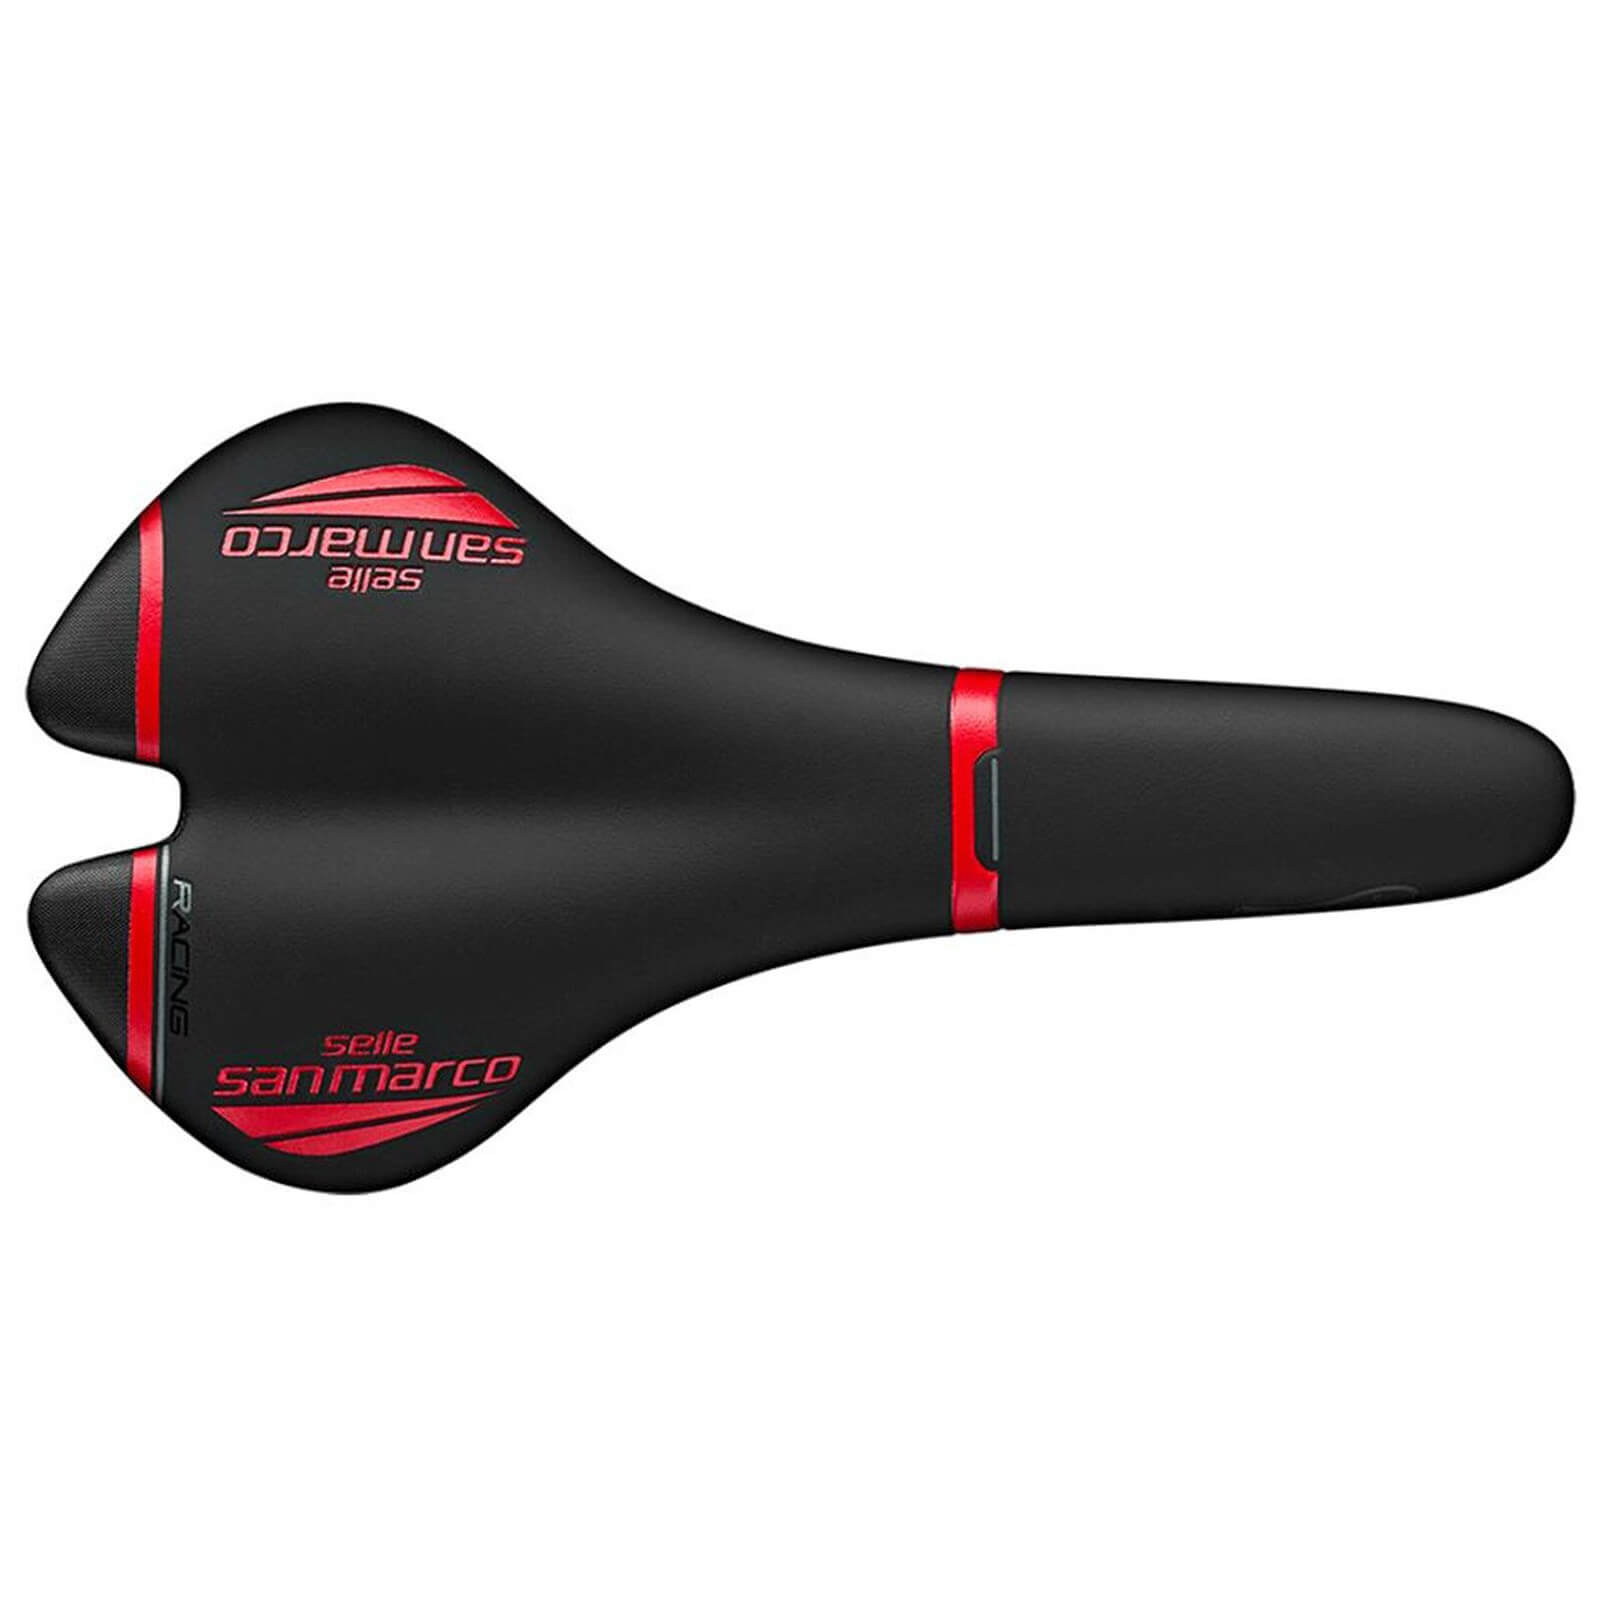 Selle San Marco Aspide Full-Fit Racing Saddle - Wide/L1 - Black/Red